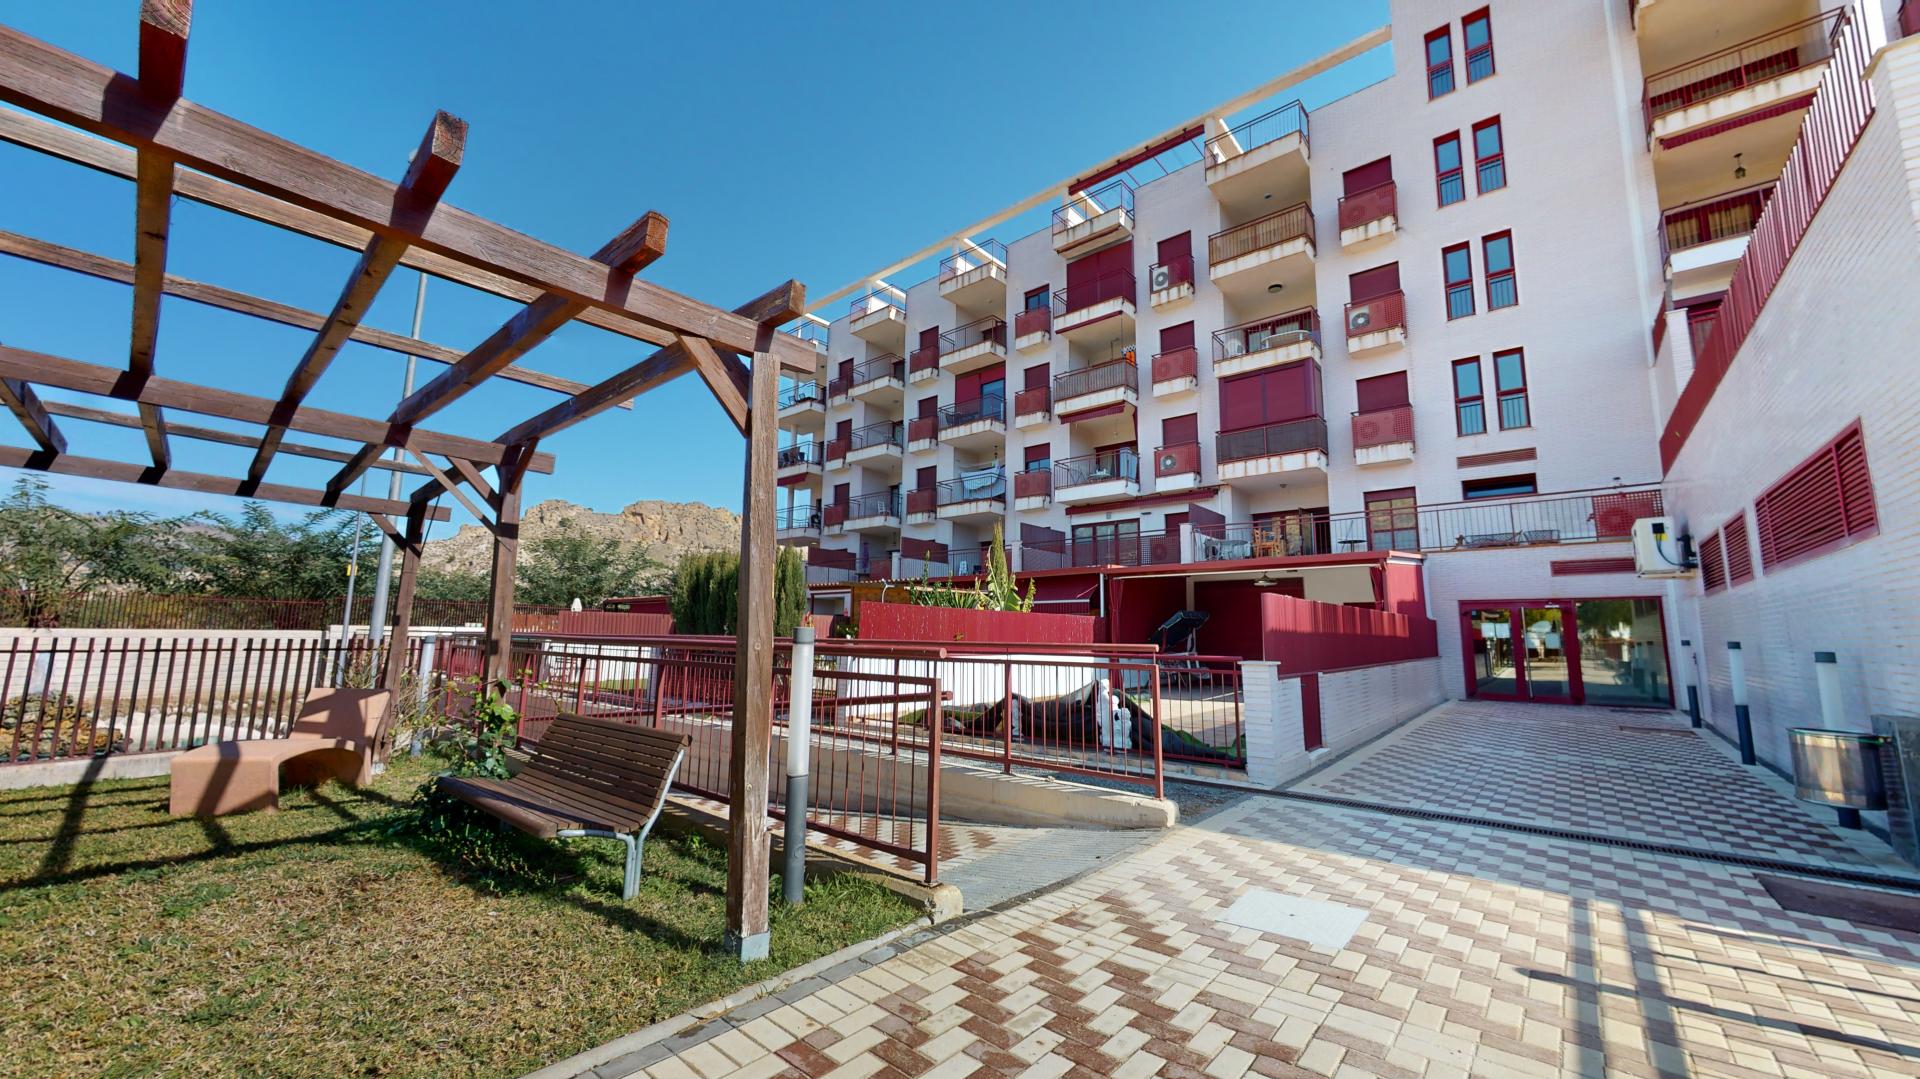 1 bedroom Apartment with terrace in Fortuna - New build in Medvilla Spanje